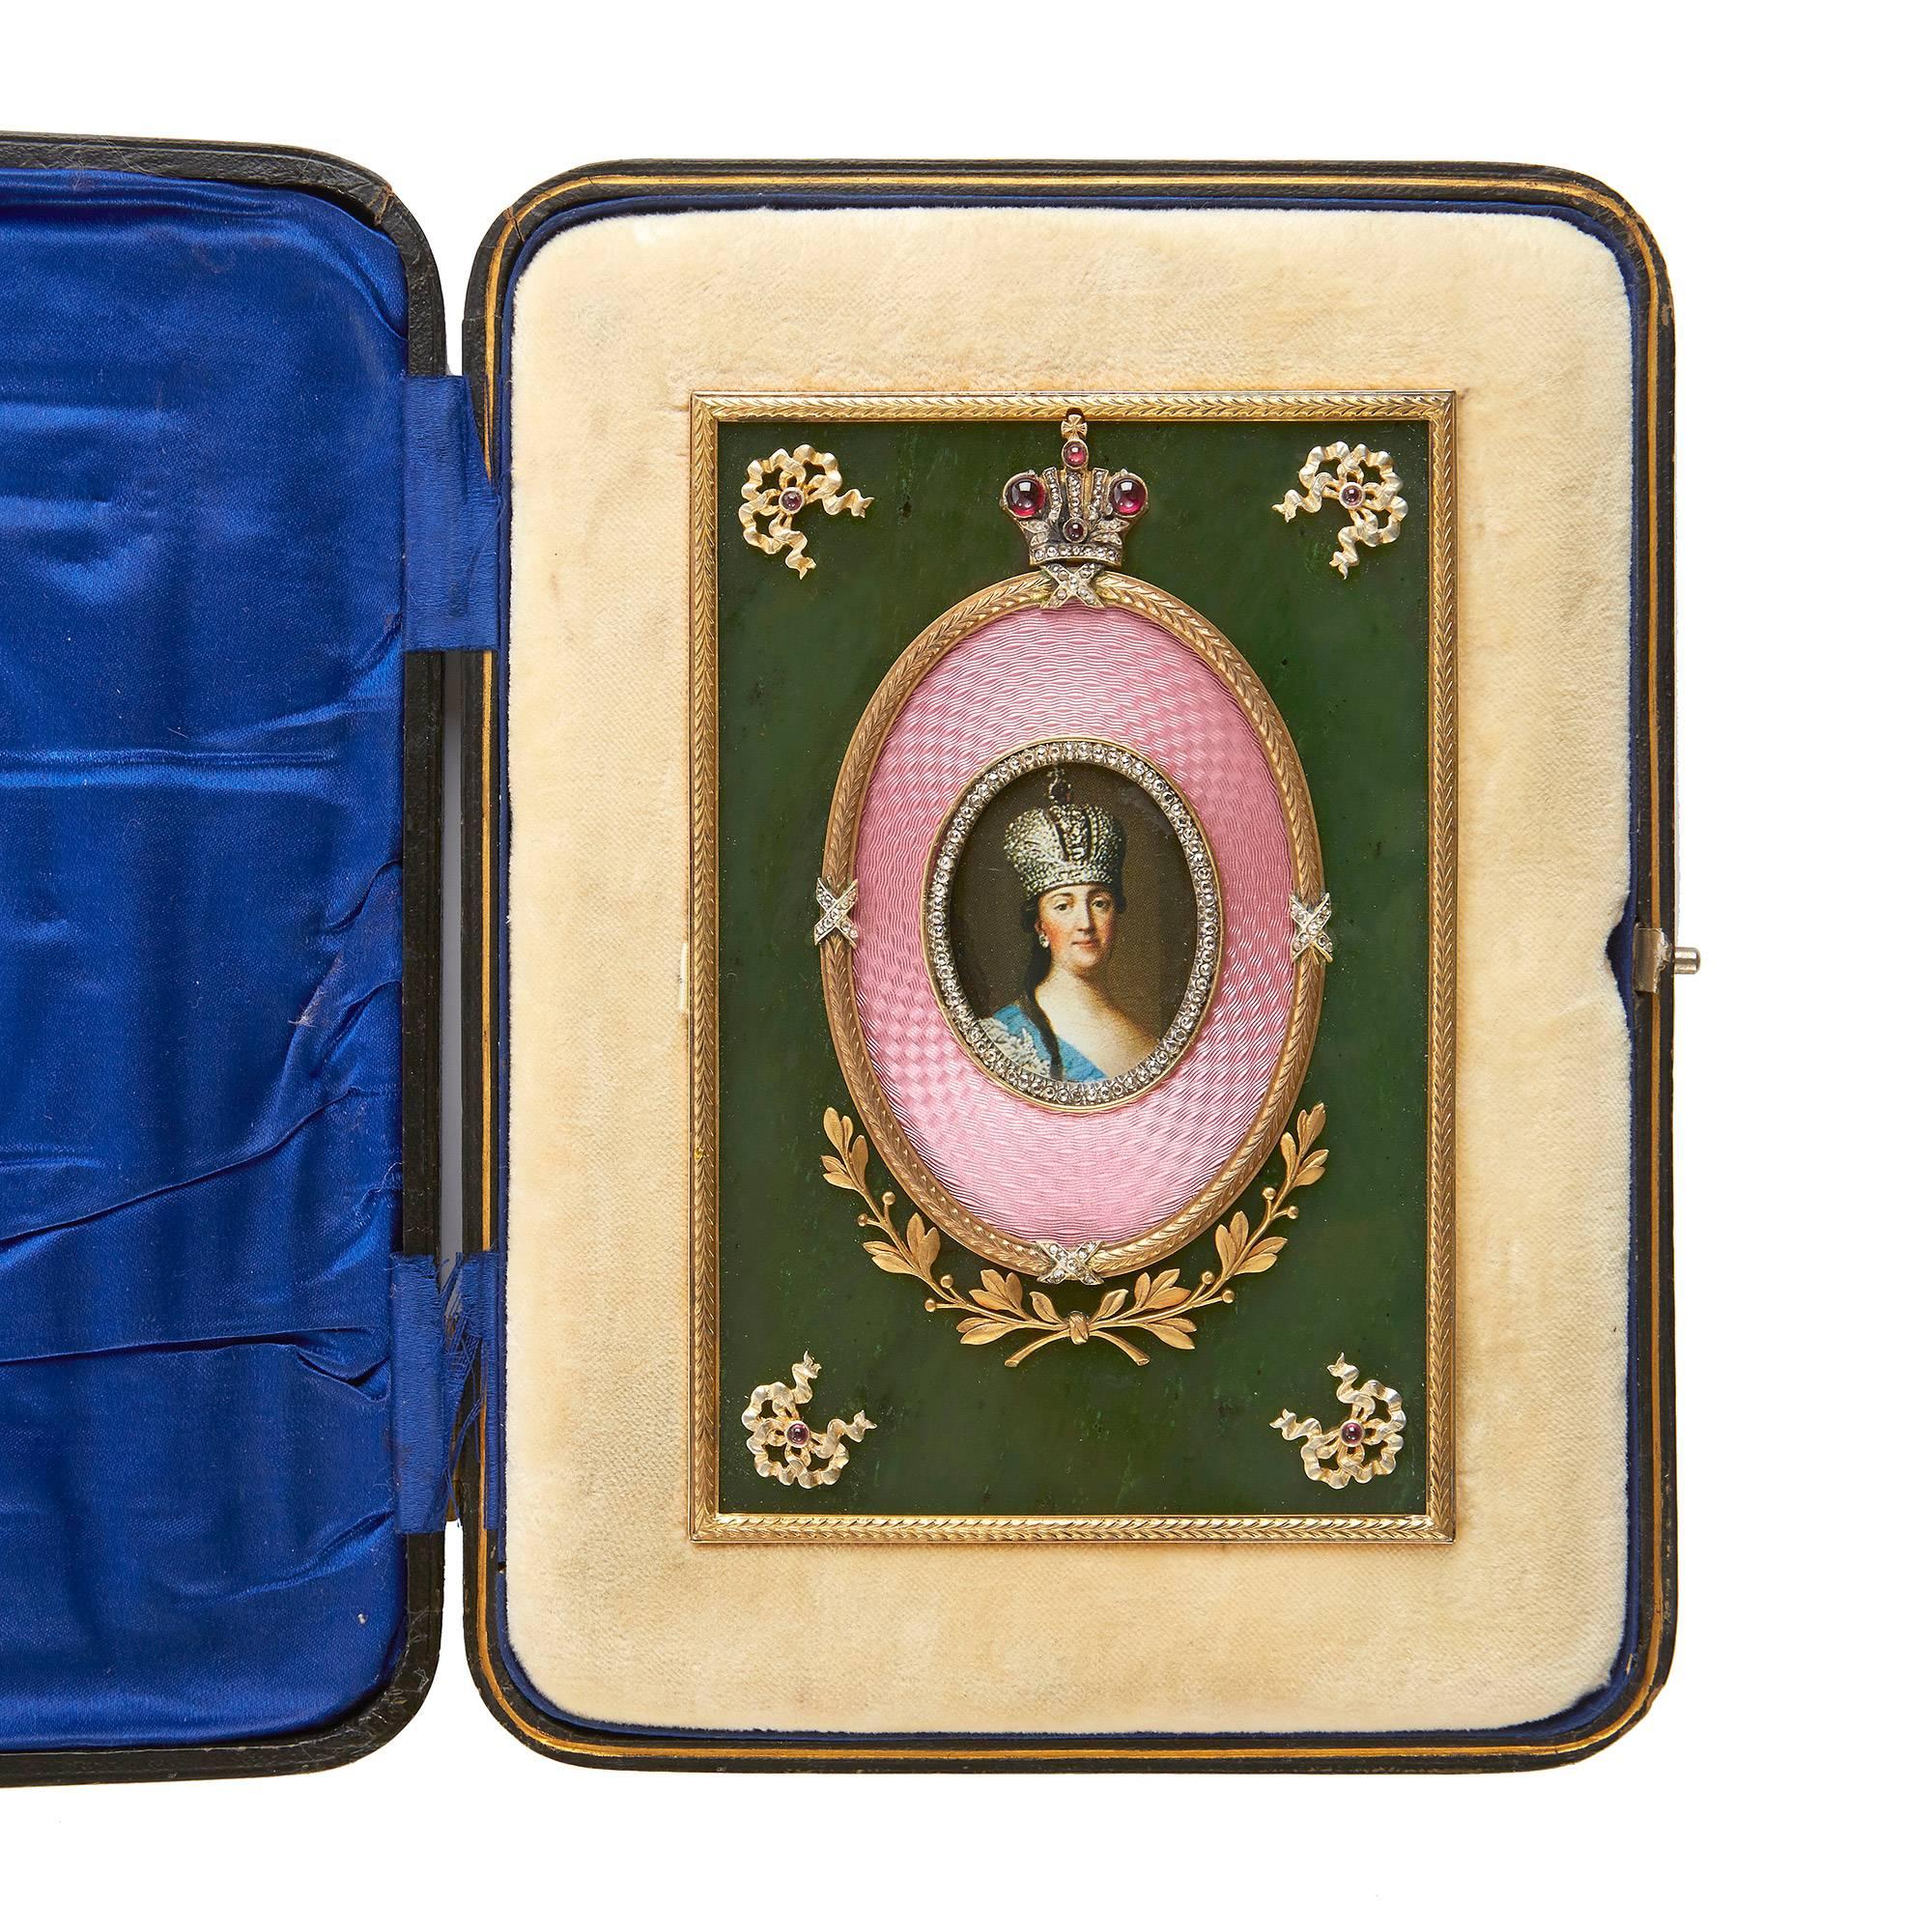 The central oval shaped photograph surrounded by a band of diamonds and pink guilloché enamel with a silver gilt border surmounted by a crown containing further precious stones and with floral decoration below, set on a nephrite panel with